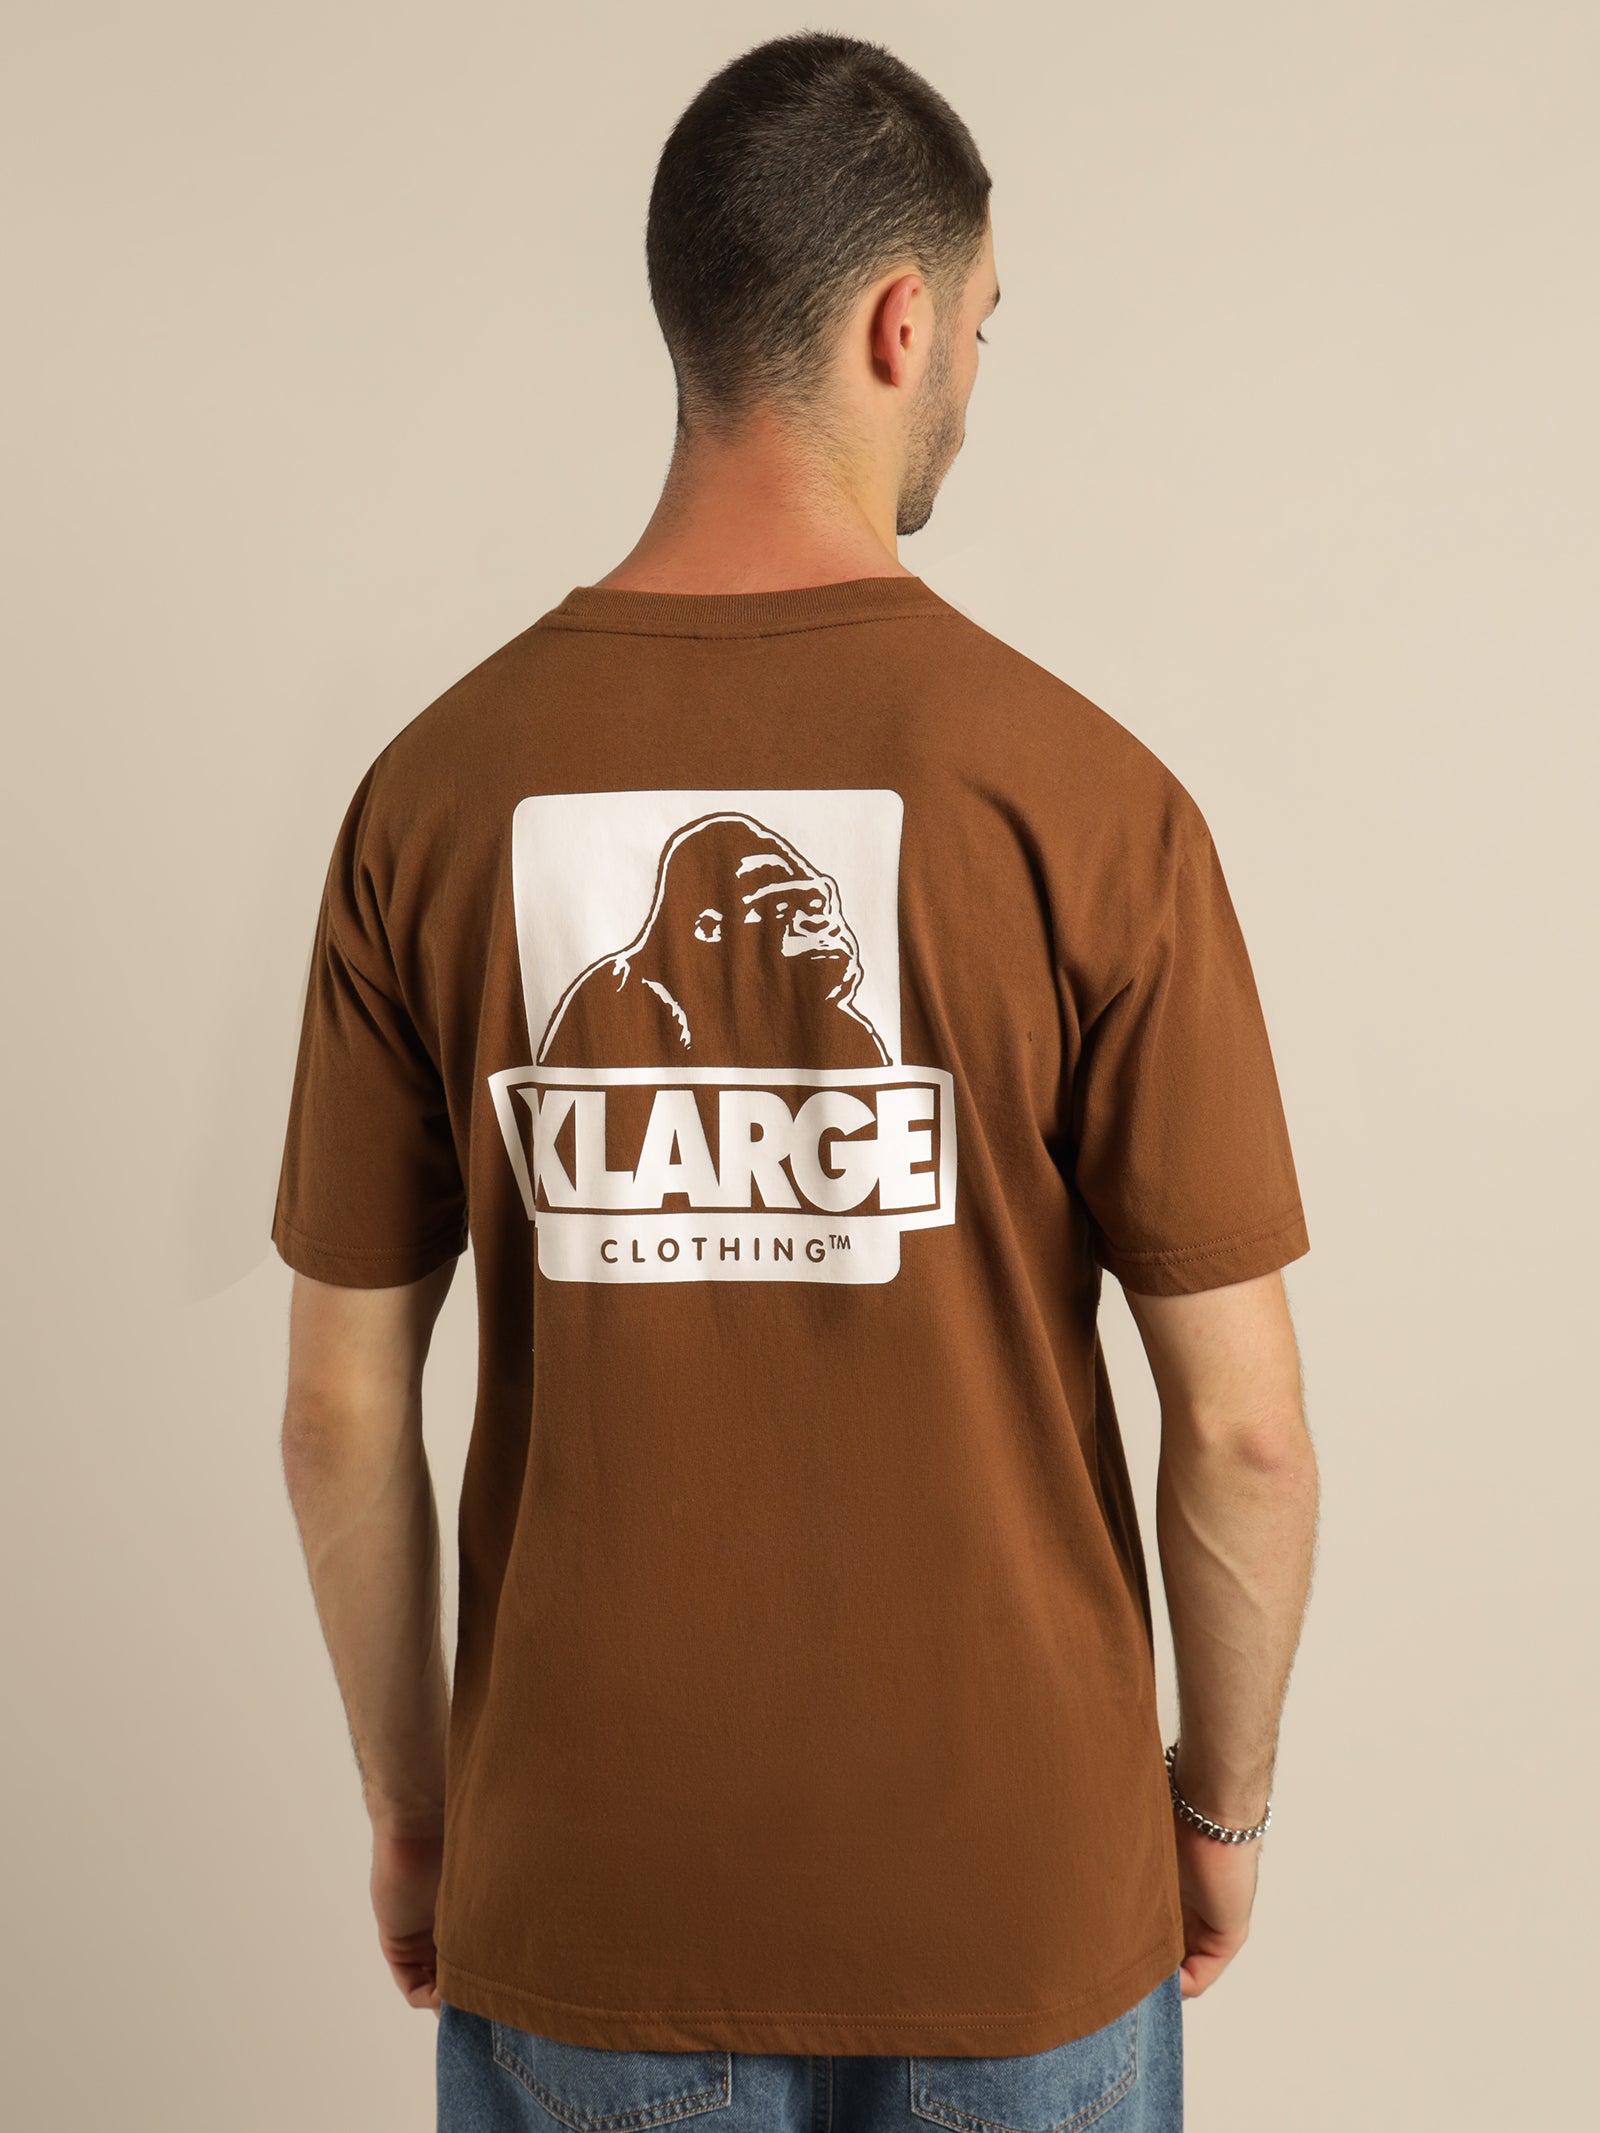 91 Text T-Shirt in Brown